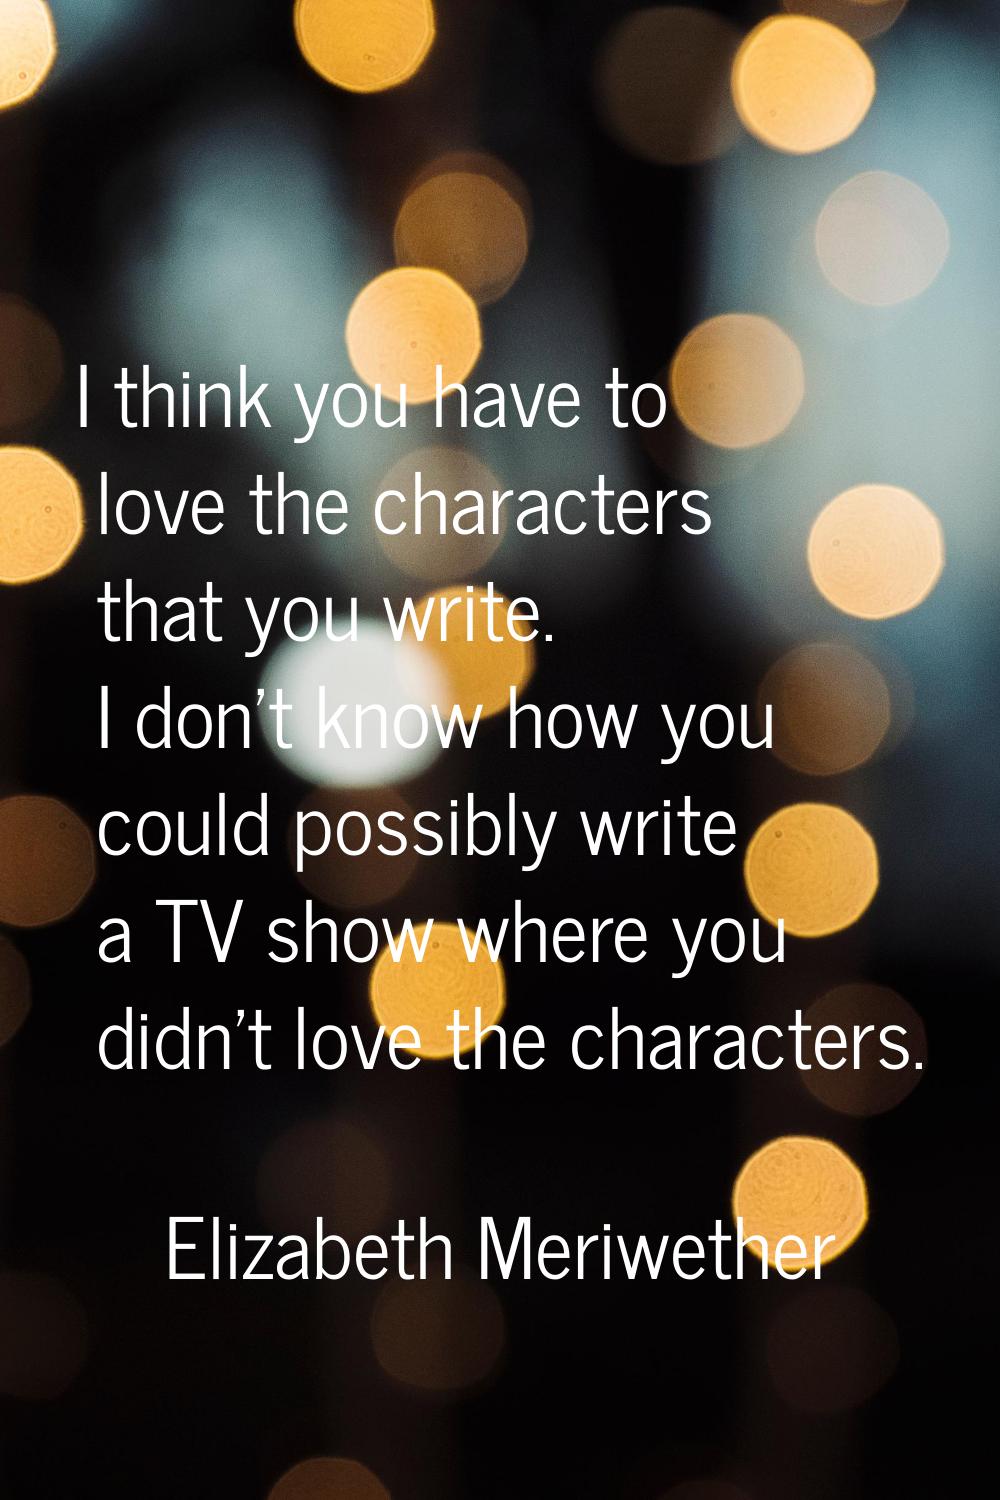 I think you have to love the characters that you write. I don't know how you could possibly write a